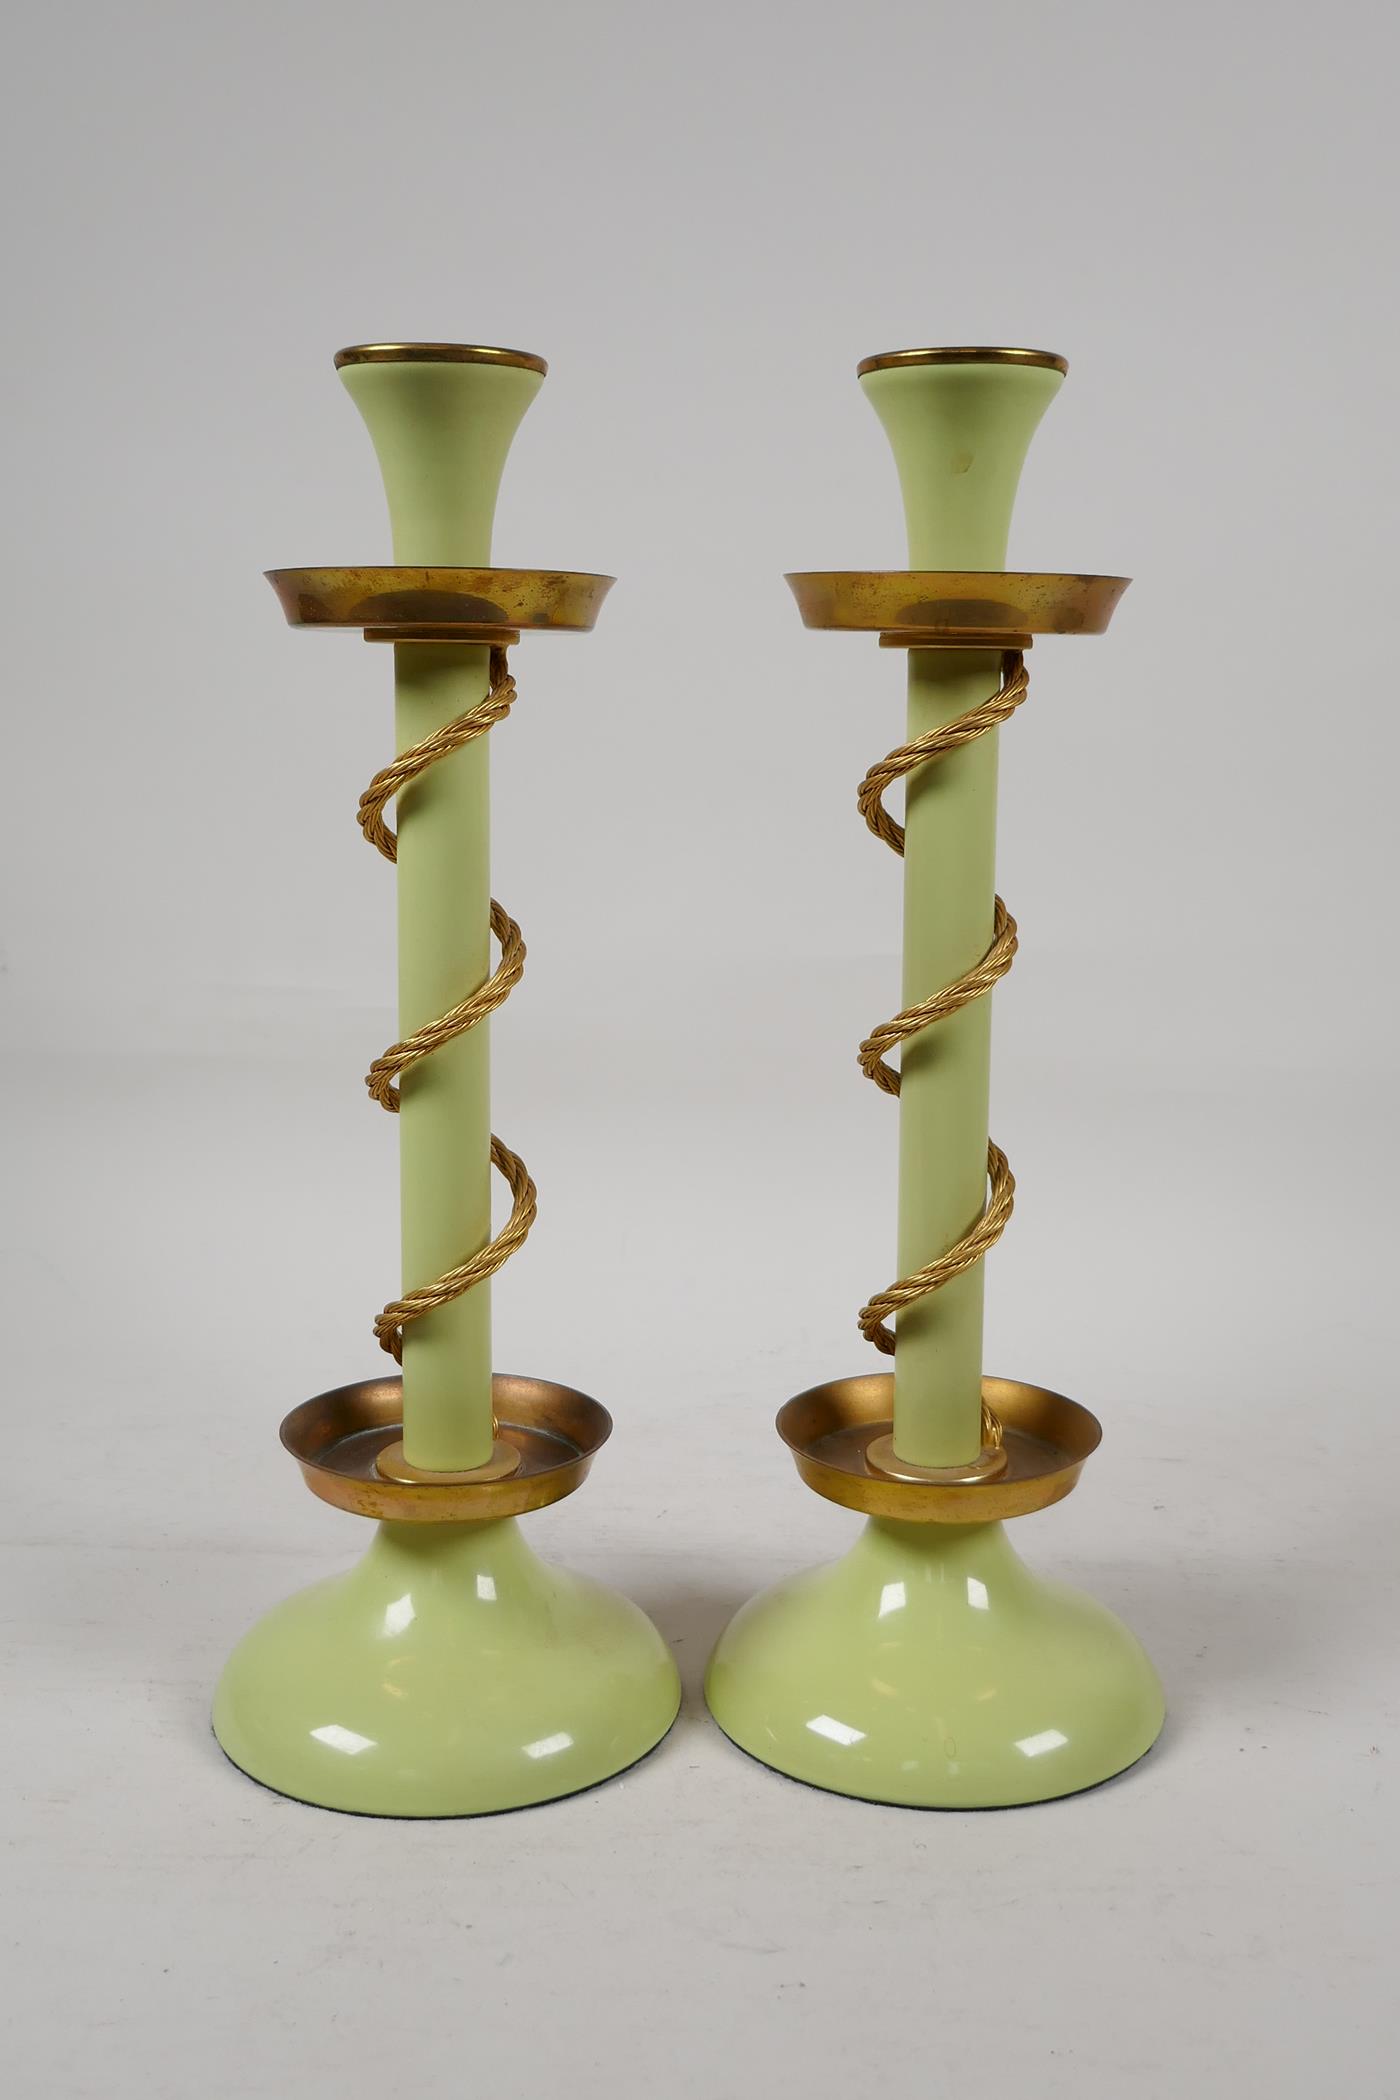 A pair of Bilston enamel candle sticks, the stem entwined with gilt metal ropework, 11½" high